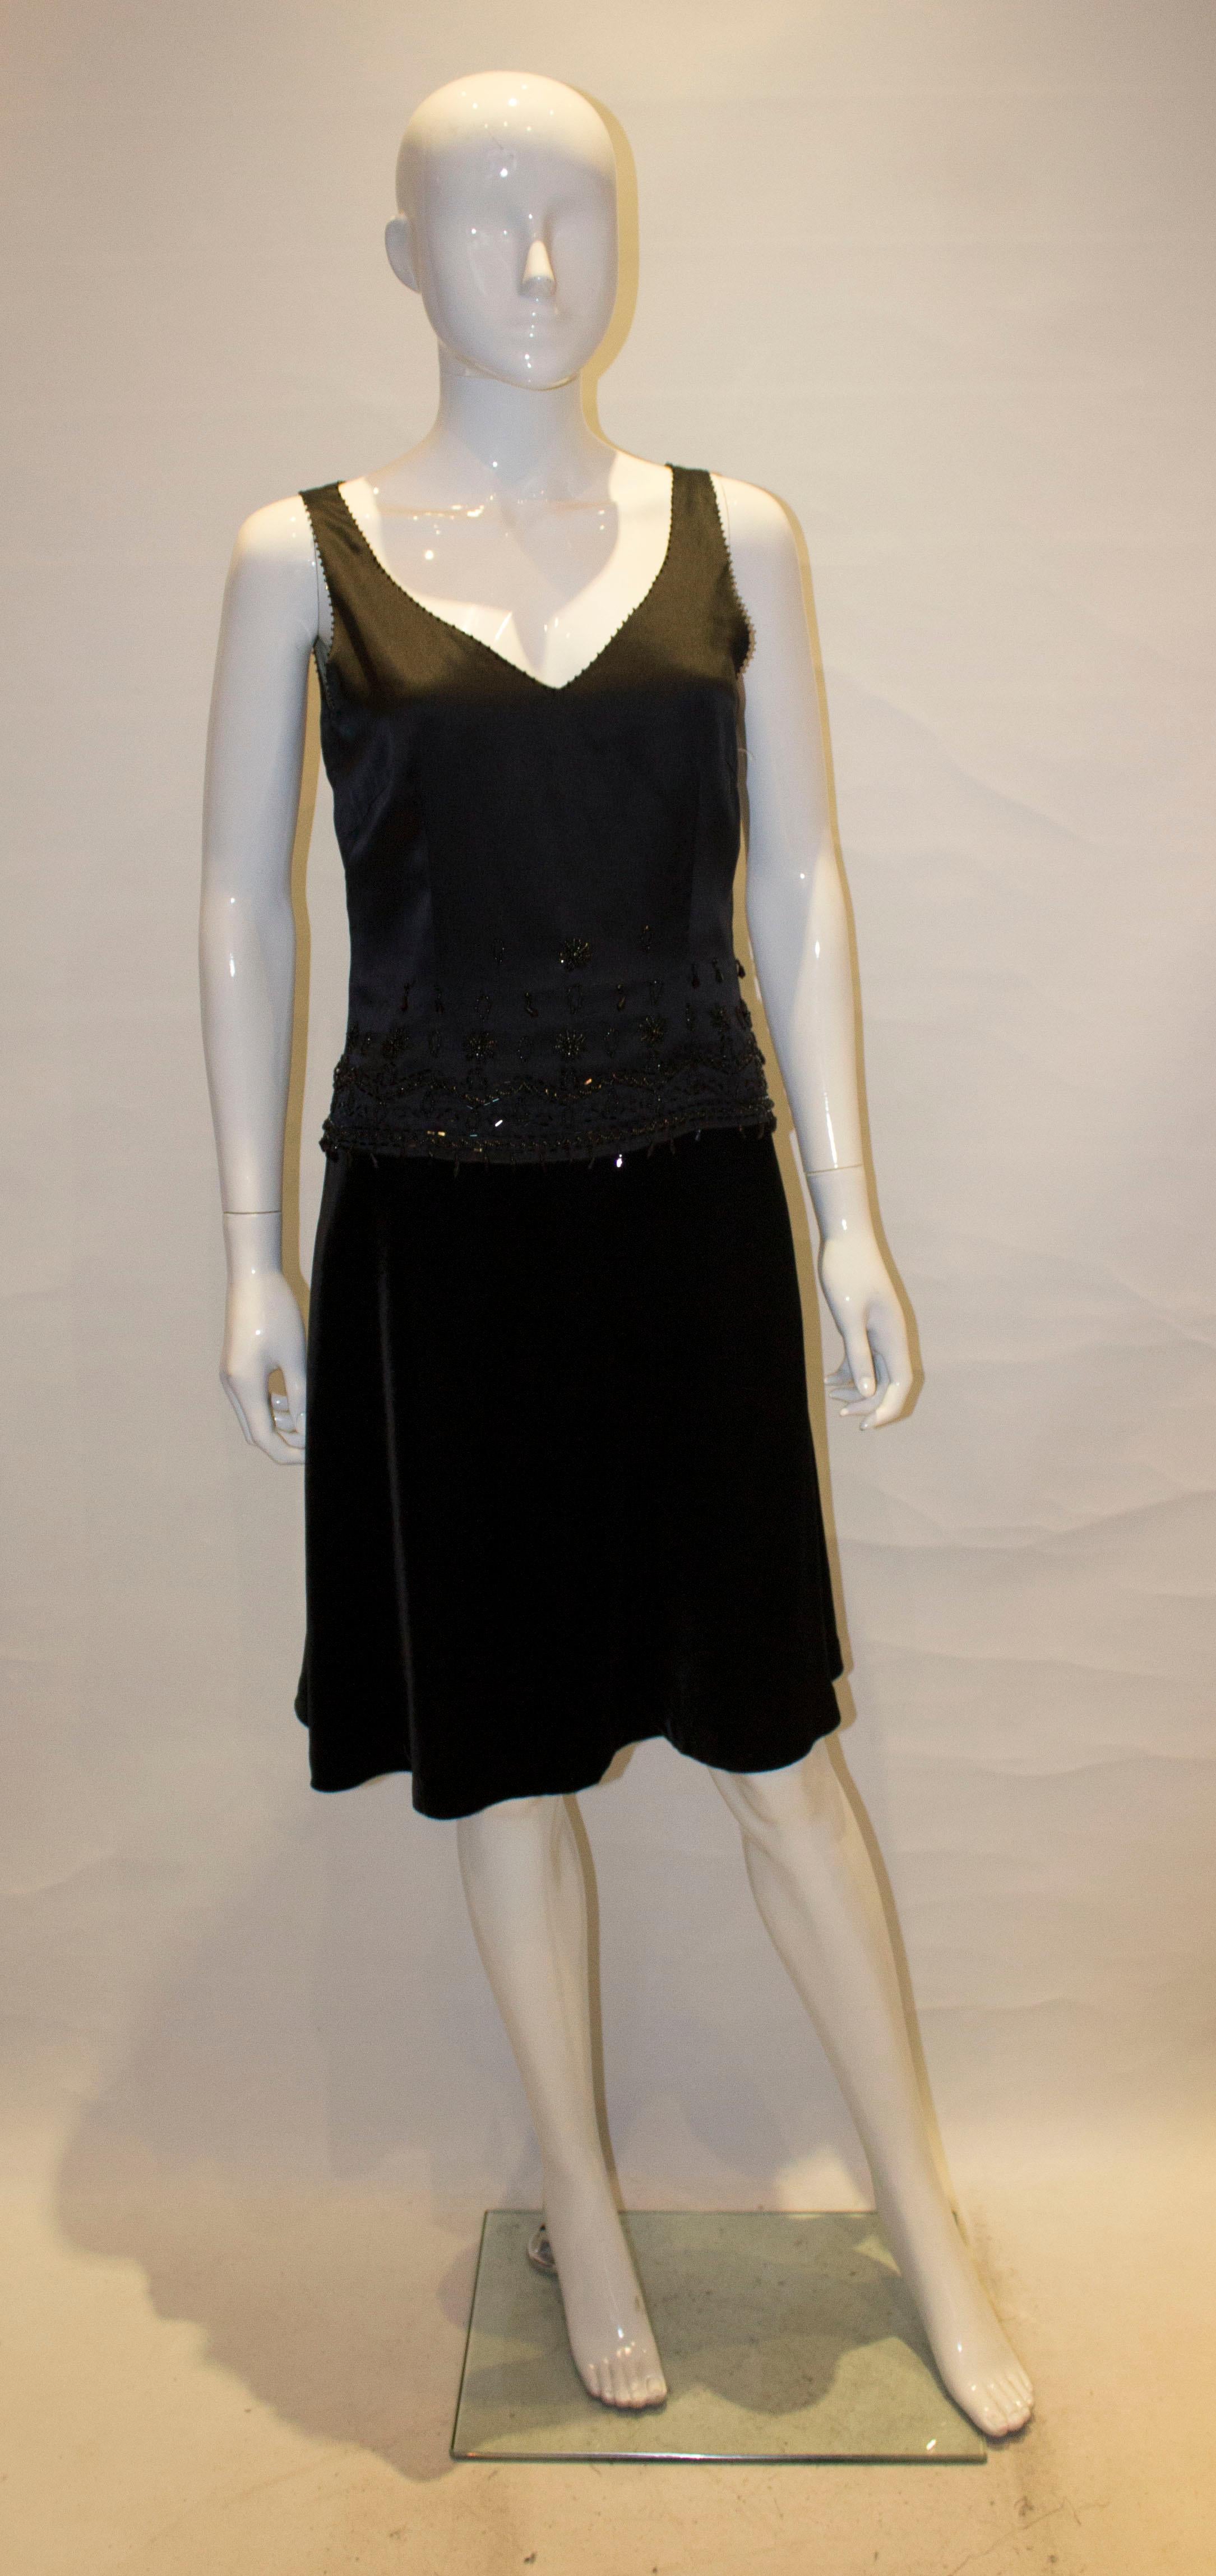 A pretty and easy to wear cocktail dress by Birger and Mikkelsen. The dress has a silk upper part and velvet skirt. There is some decorative bead work. The dress is fully lined and has a side zip opening.